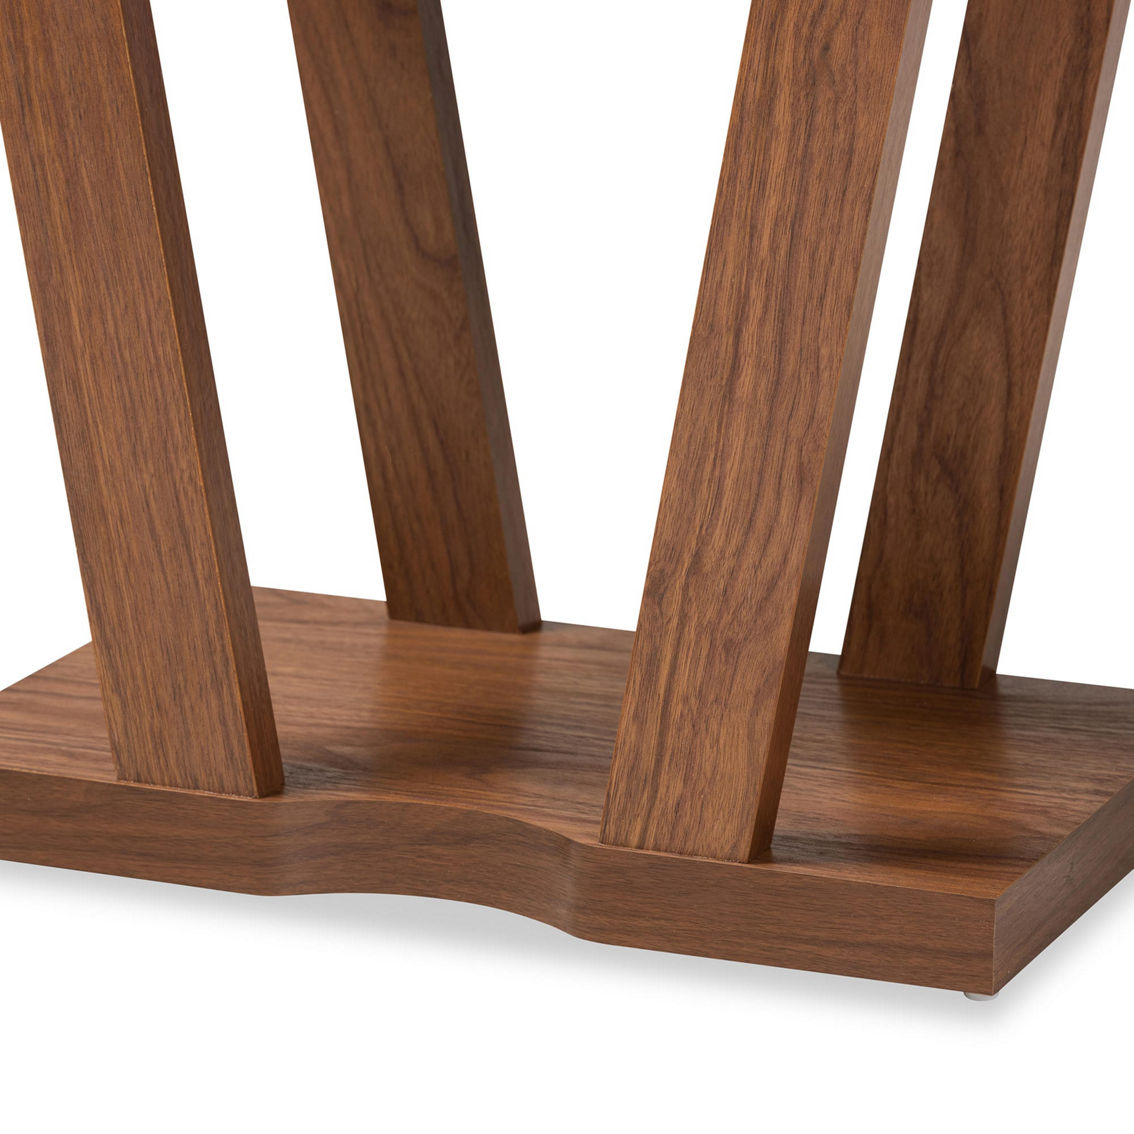 Baxton Studio Boone Walnut Brown Finished Wood Console Table - Image 5 of 5